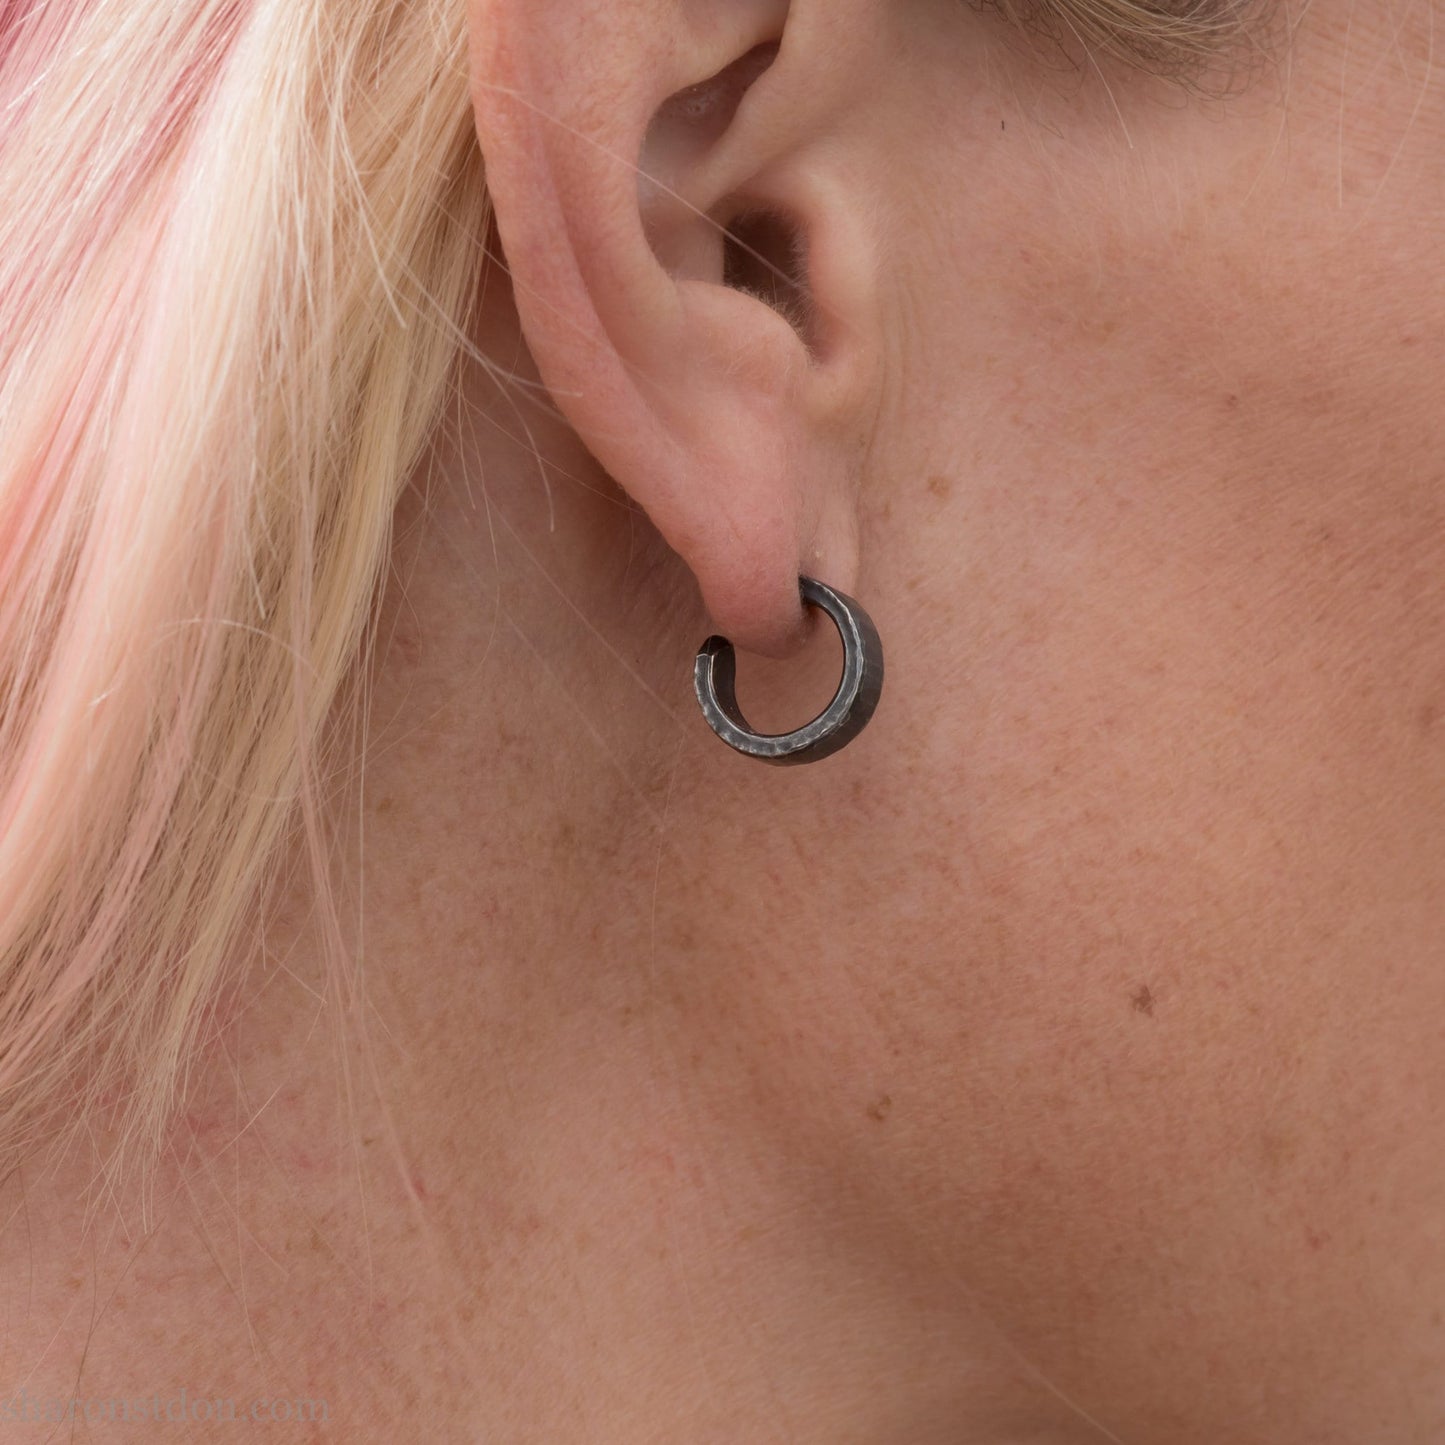 14mm x 4mm small sterling silver hoop earrings. Handmade in North America by Sharon SaintDon. Hammered solid silver with silver posts and backs. Oxidized black.